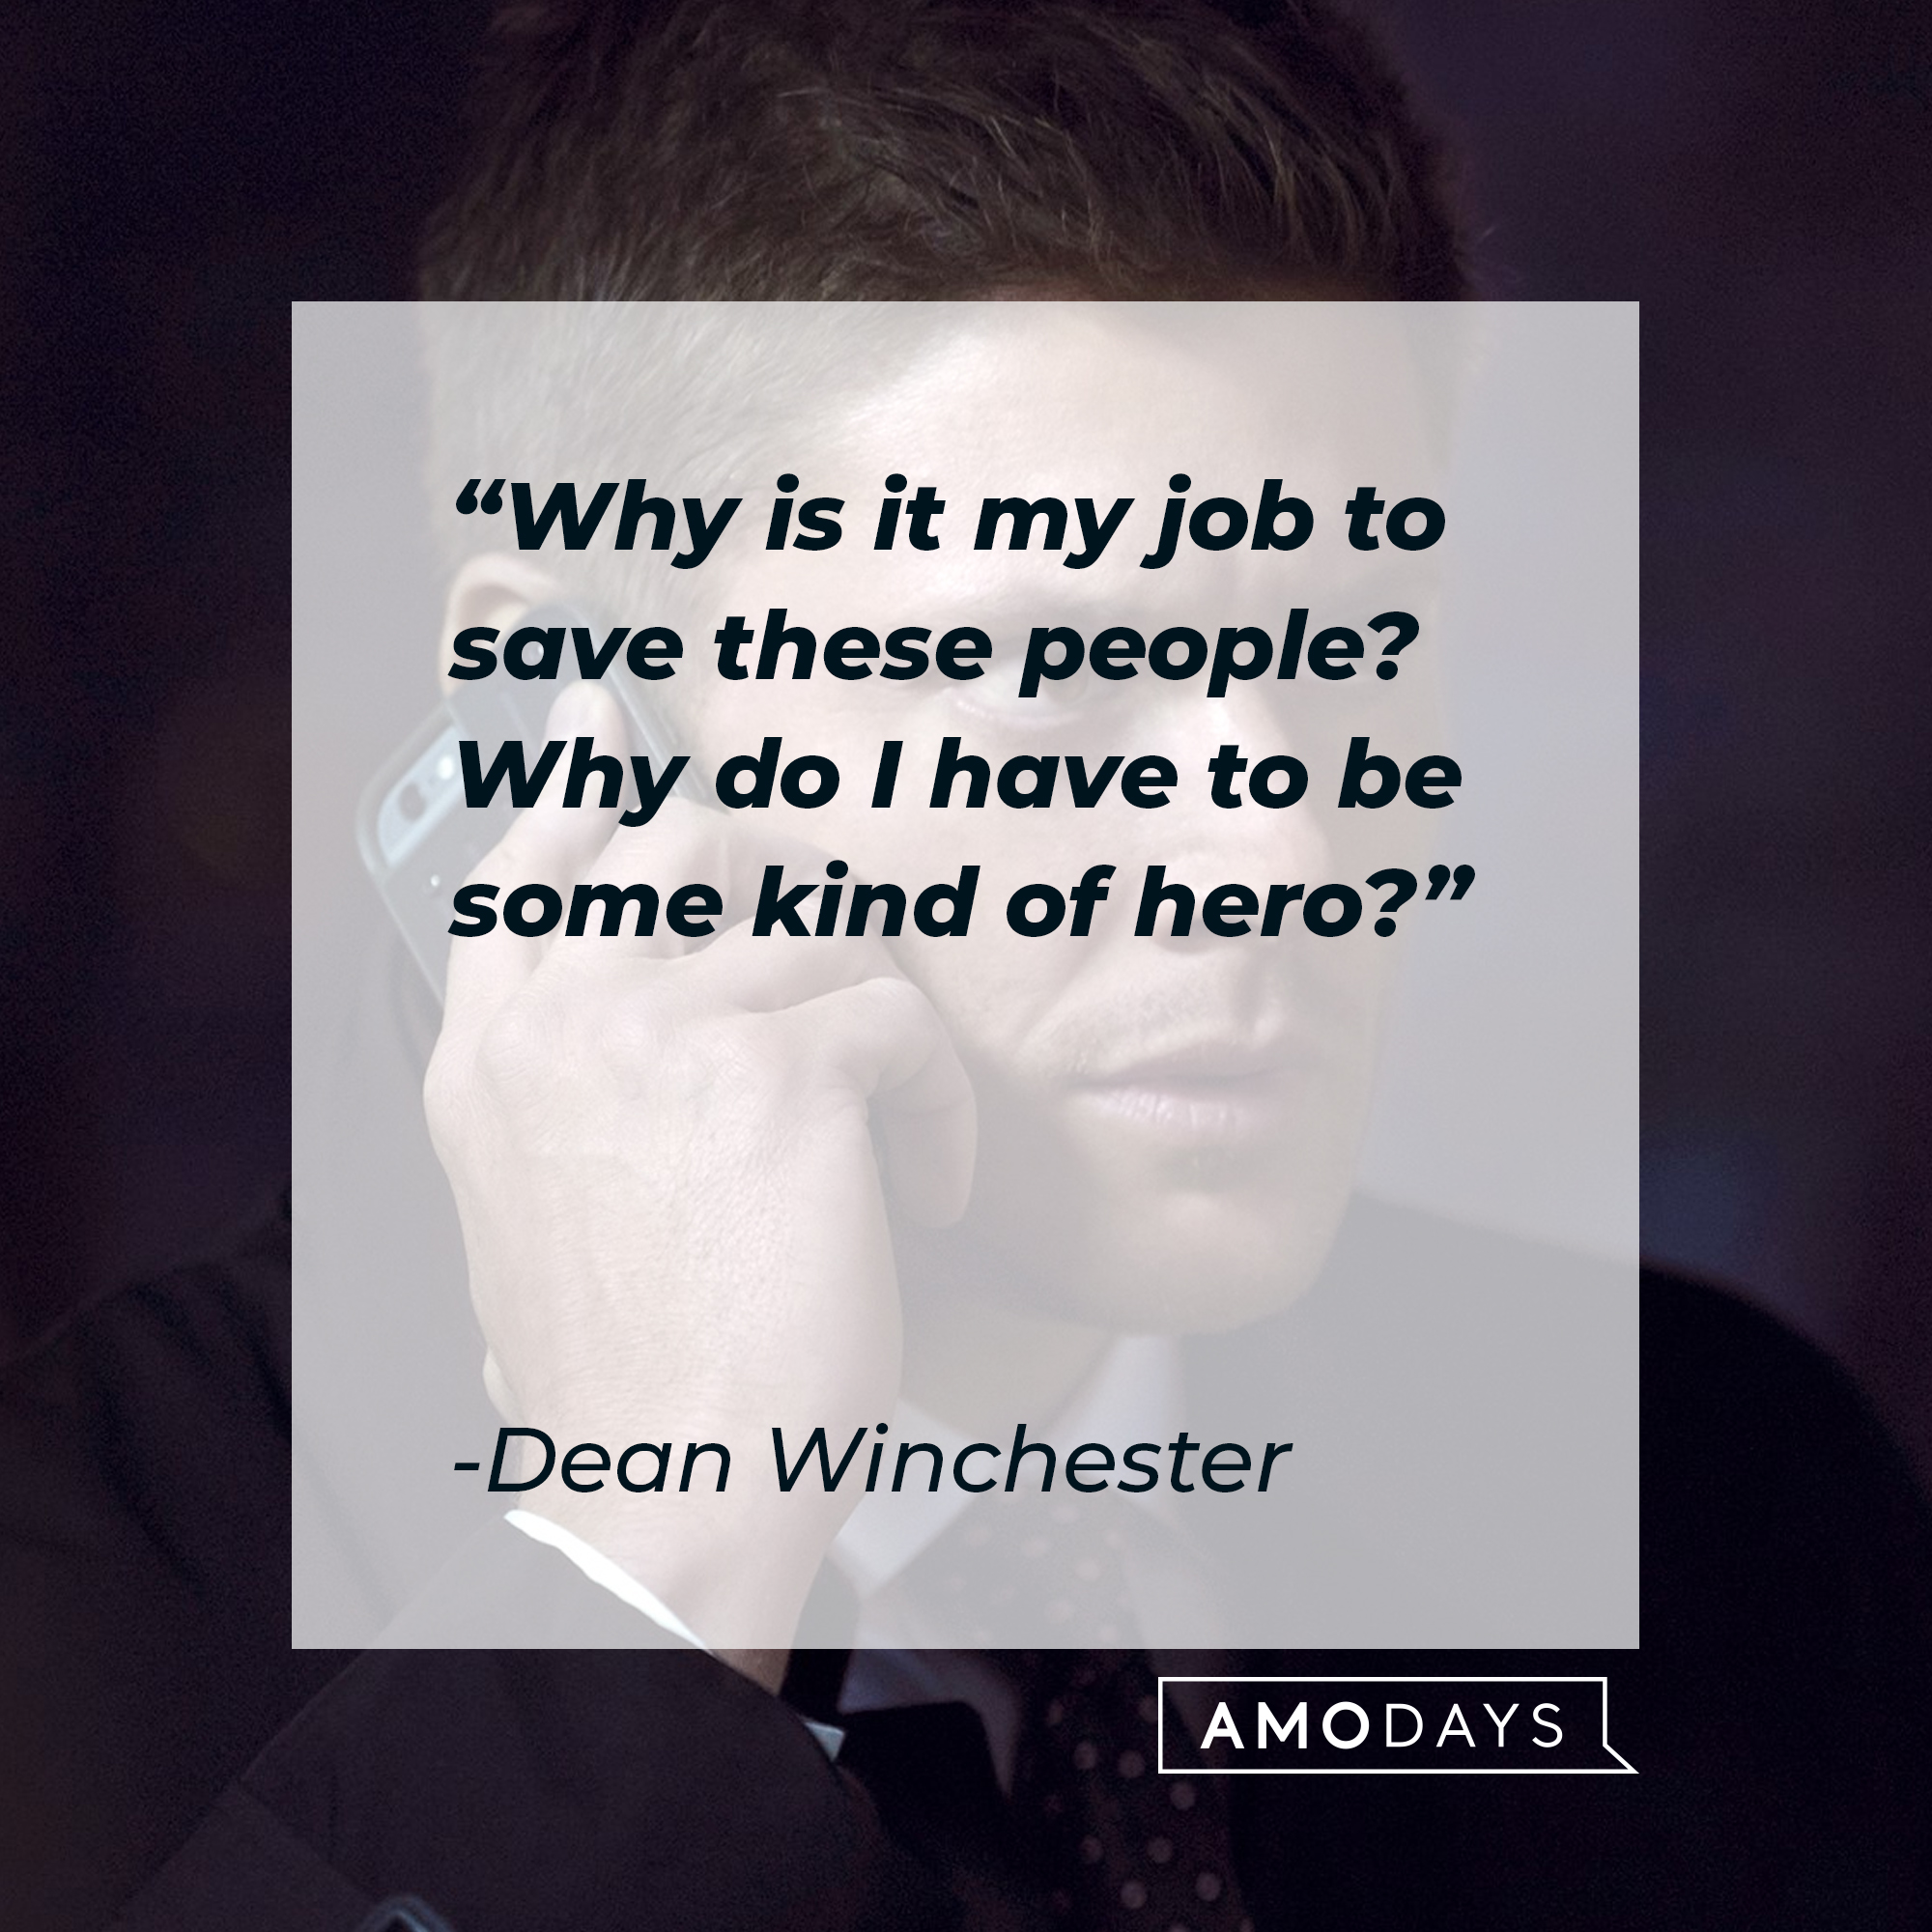 Dean Winchester with his quote: “Why is it my job to save these people? Why do I have to be some kind of hero?” | Source: Facebook.com/Supernatural